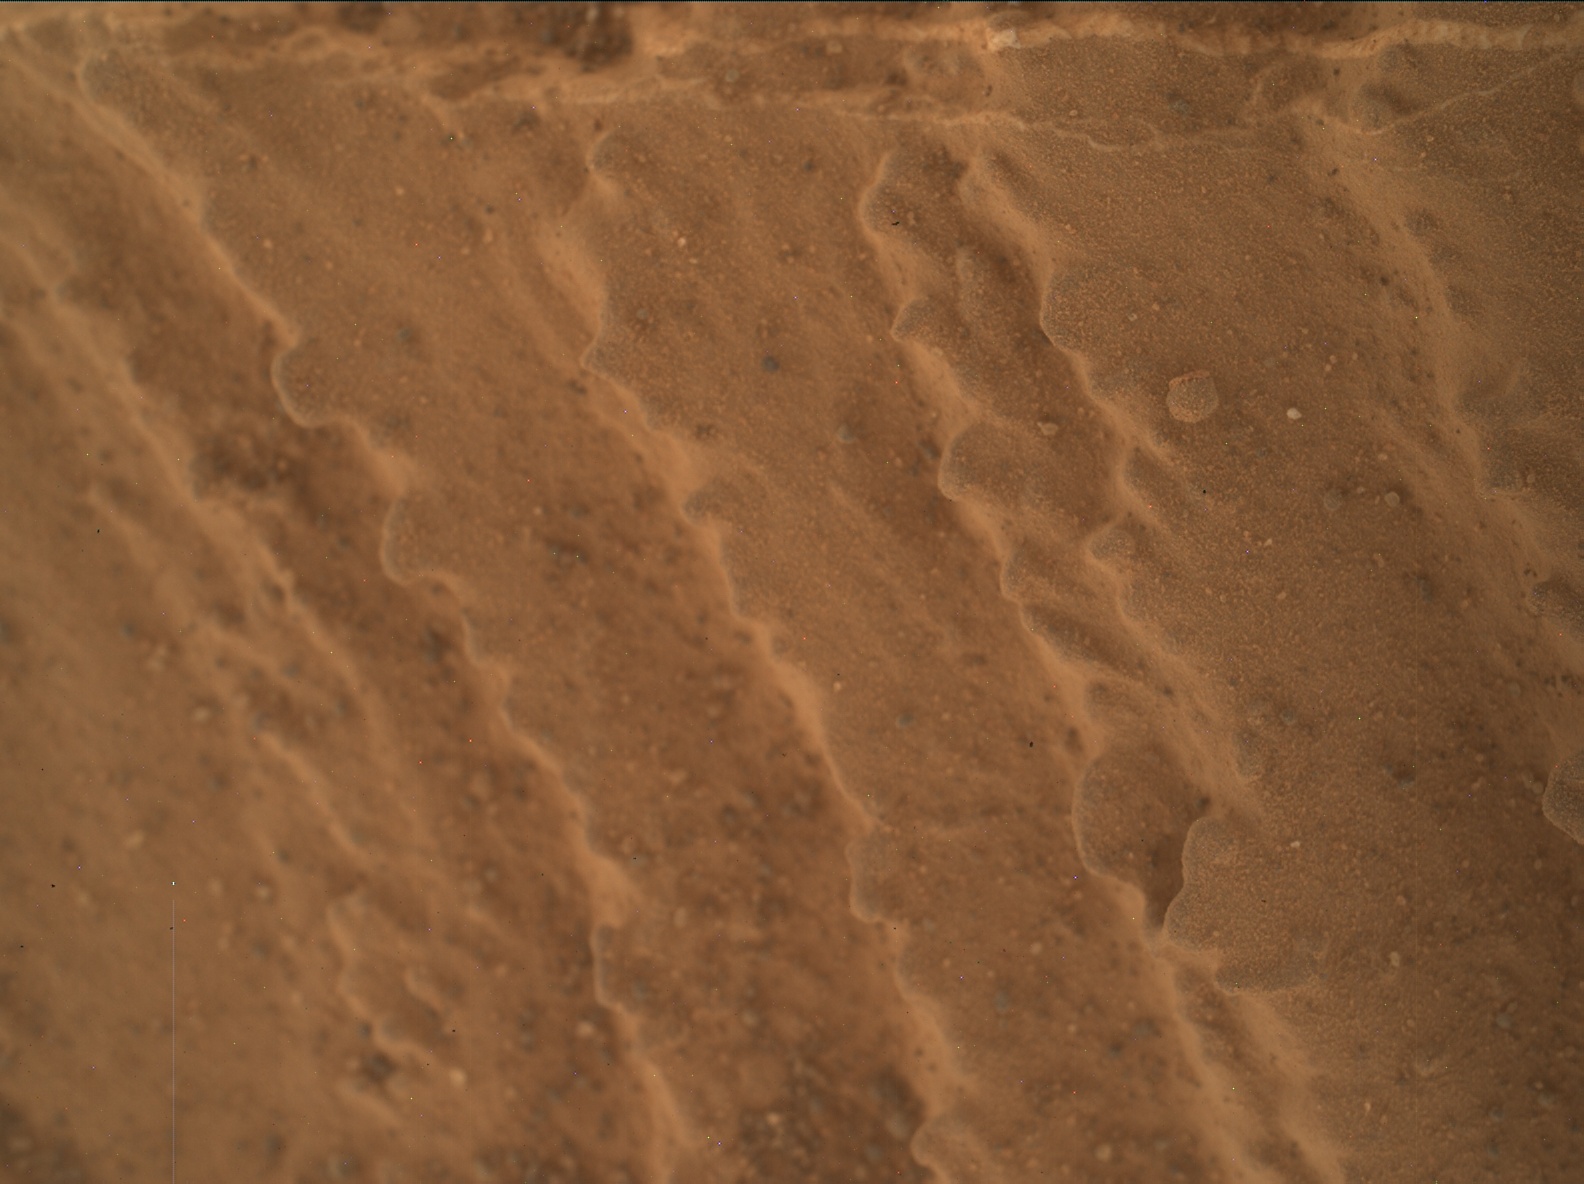 Nasa's Mars rover Curiosity acquired this image using its Mars Hand Lens Imager (MAHLI) on Sol 3279